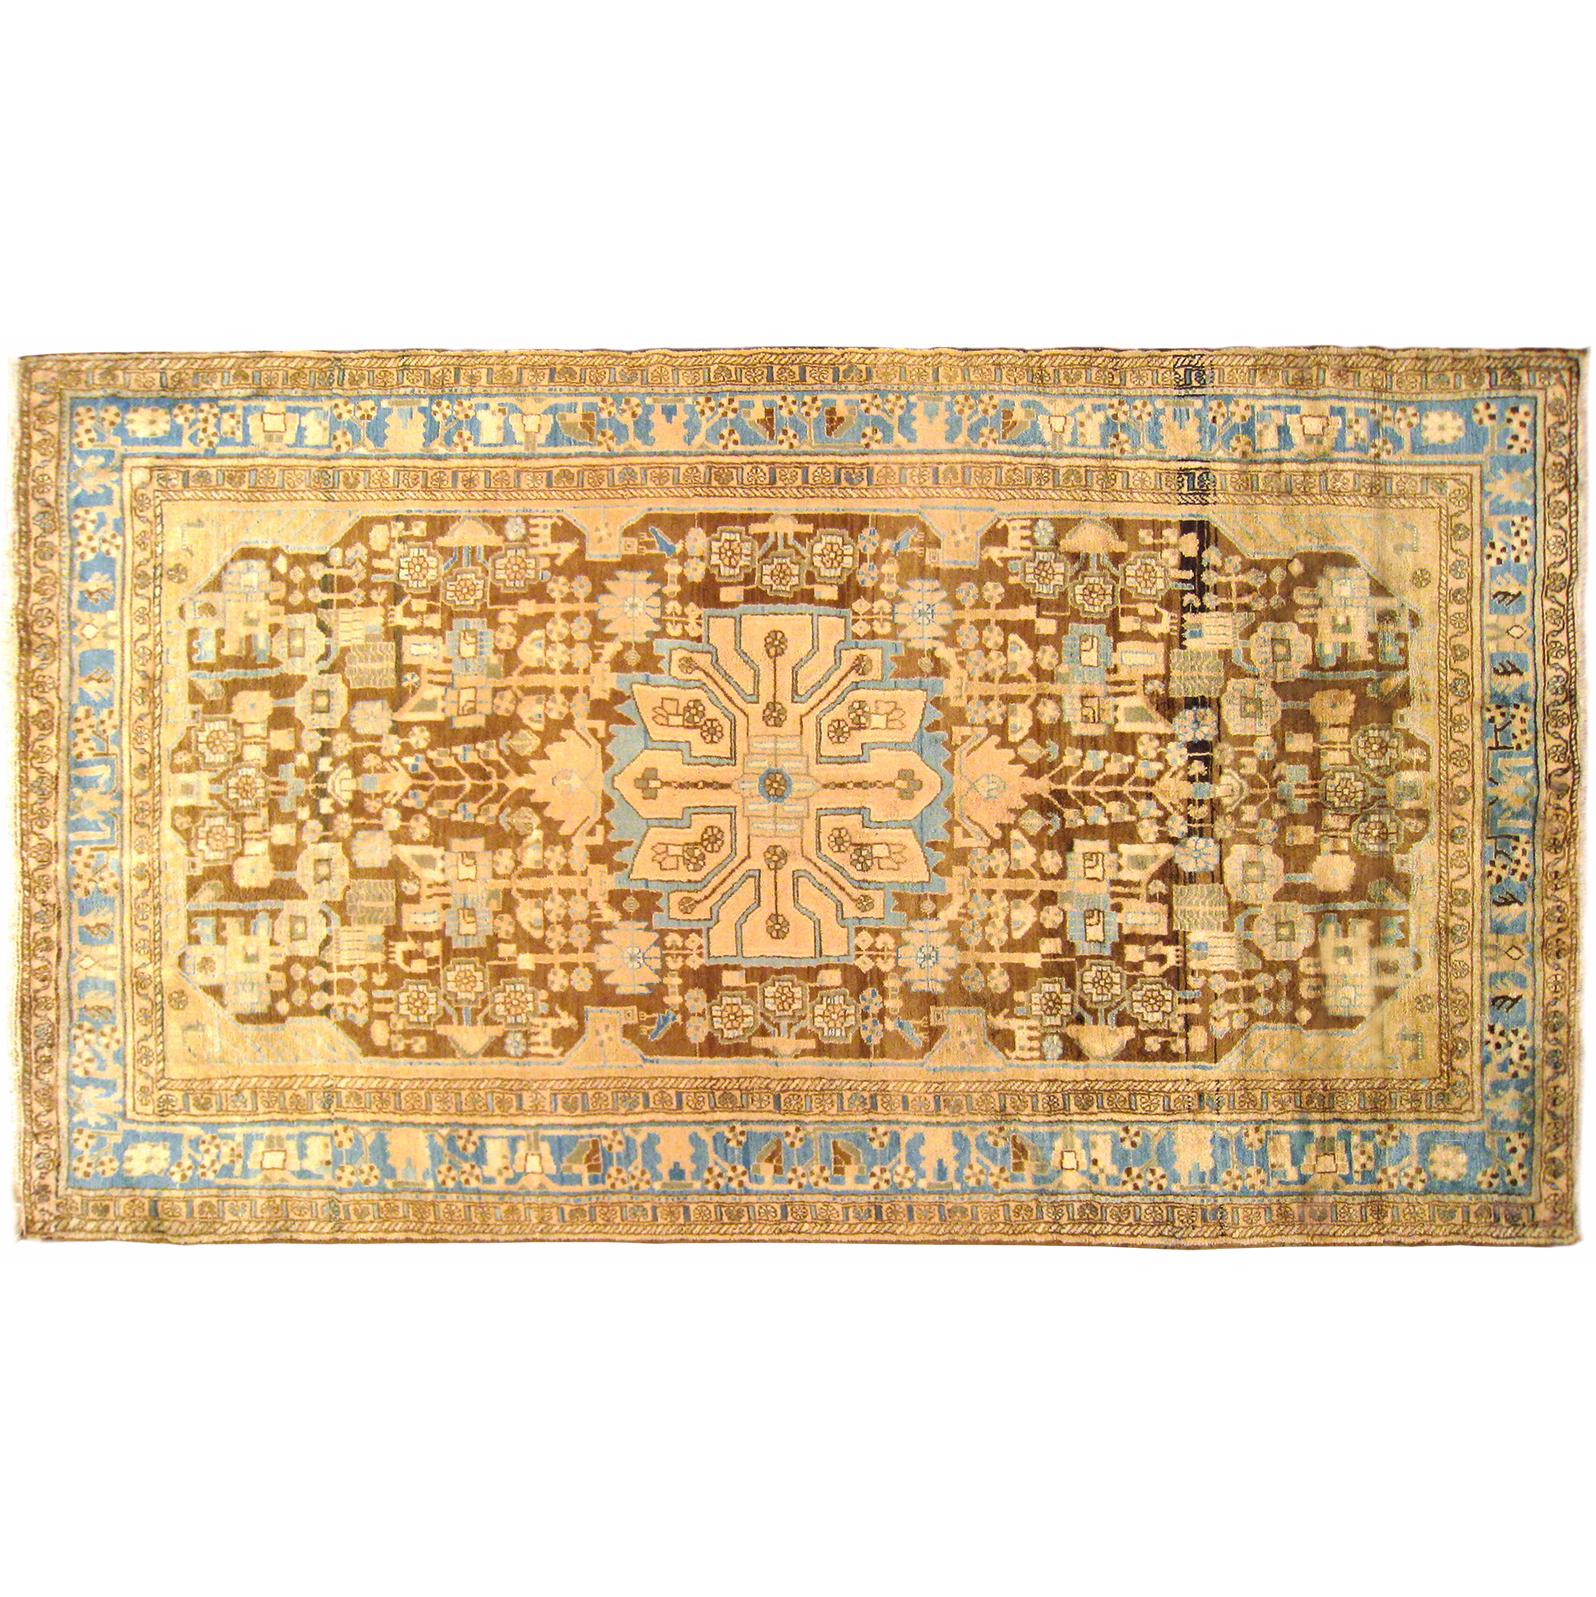 Vintage Persian Hamadan Oriental Rug in Small Gallery Size with Soft Earth Tones